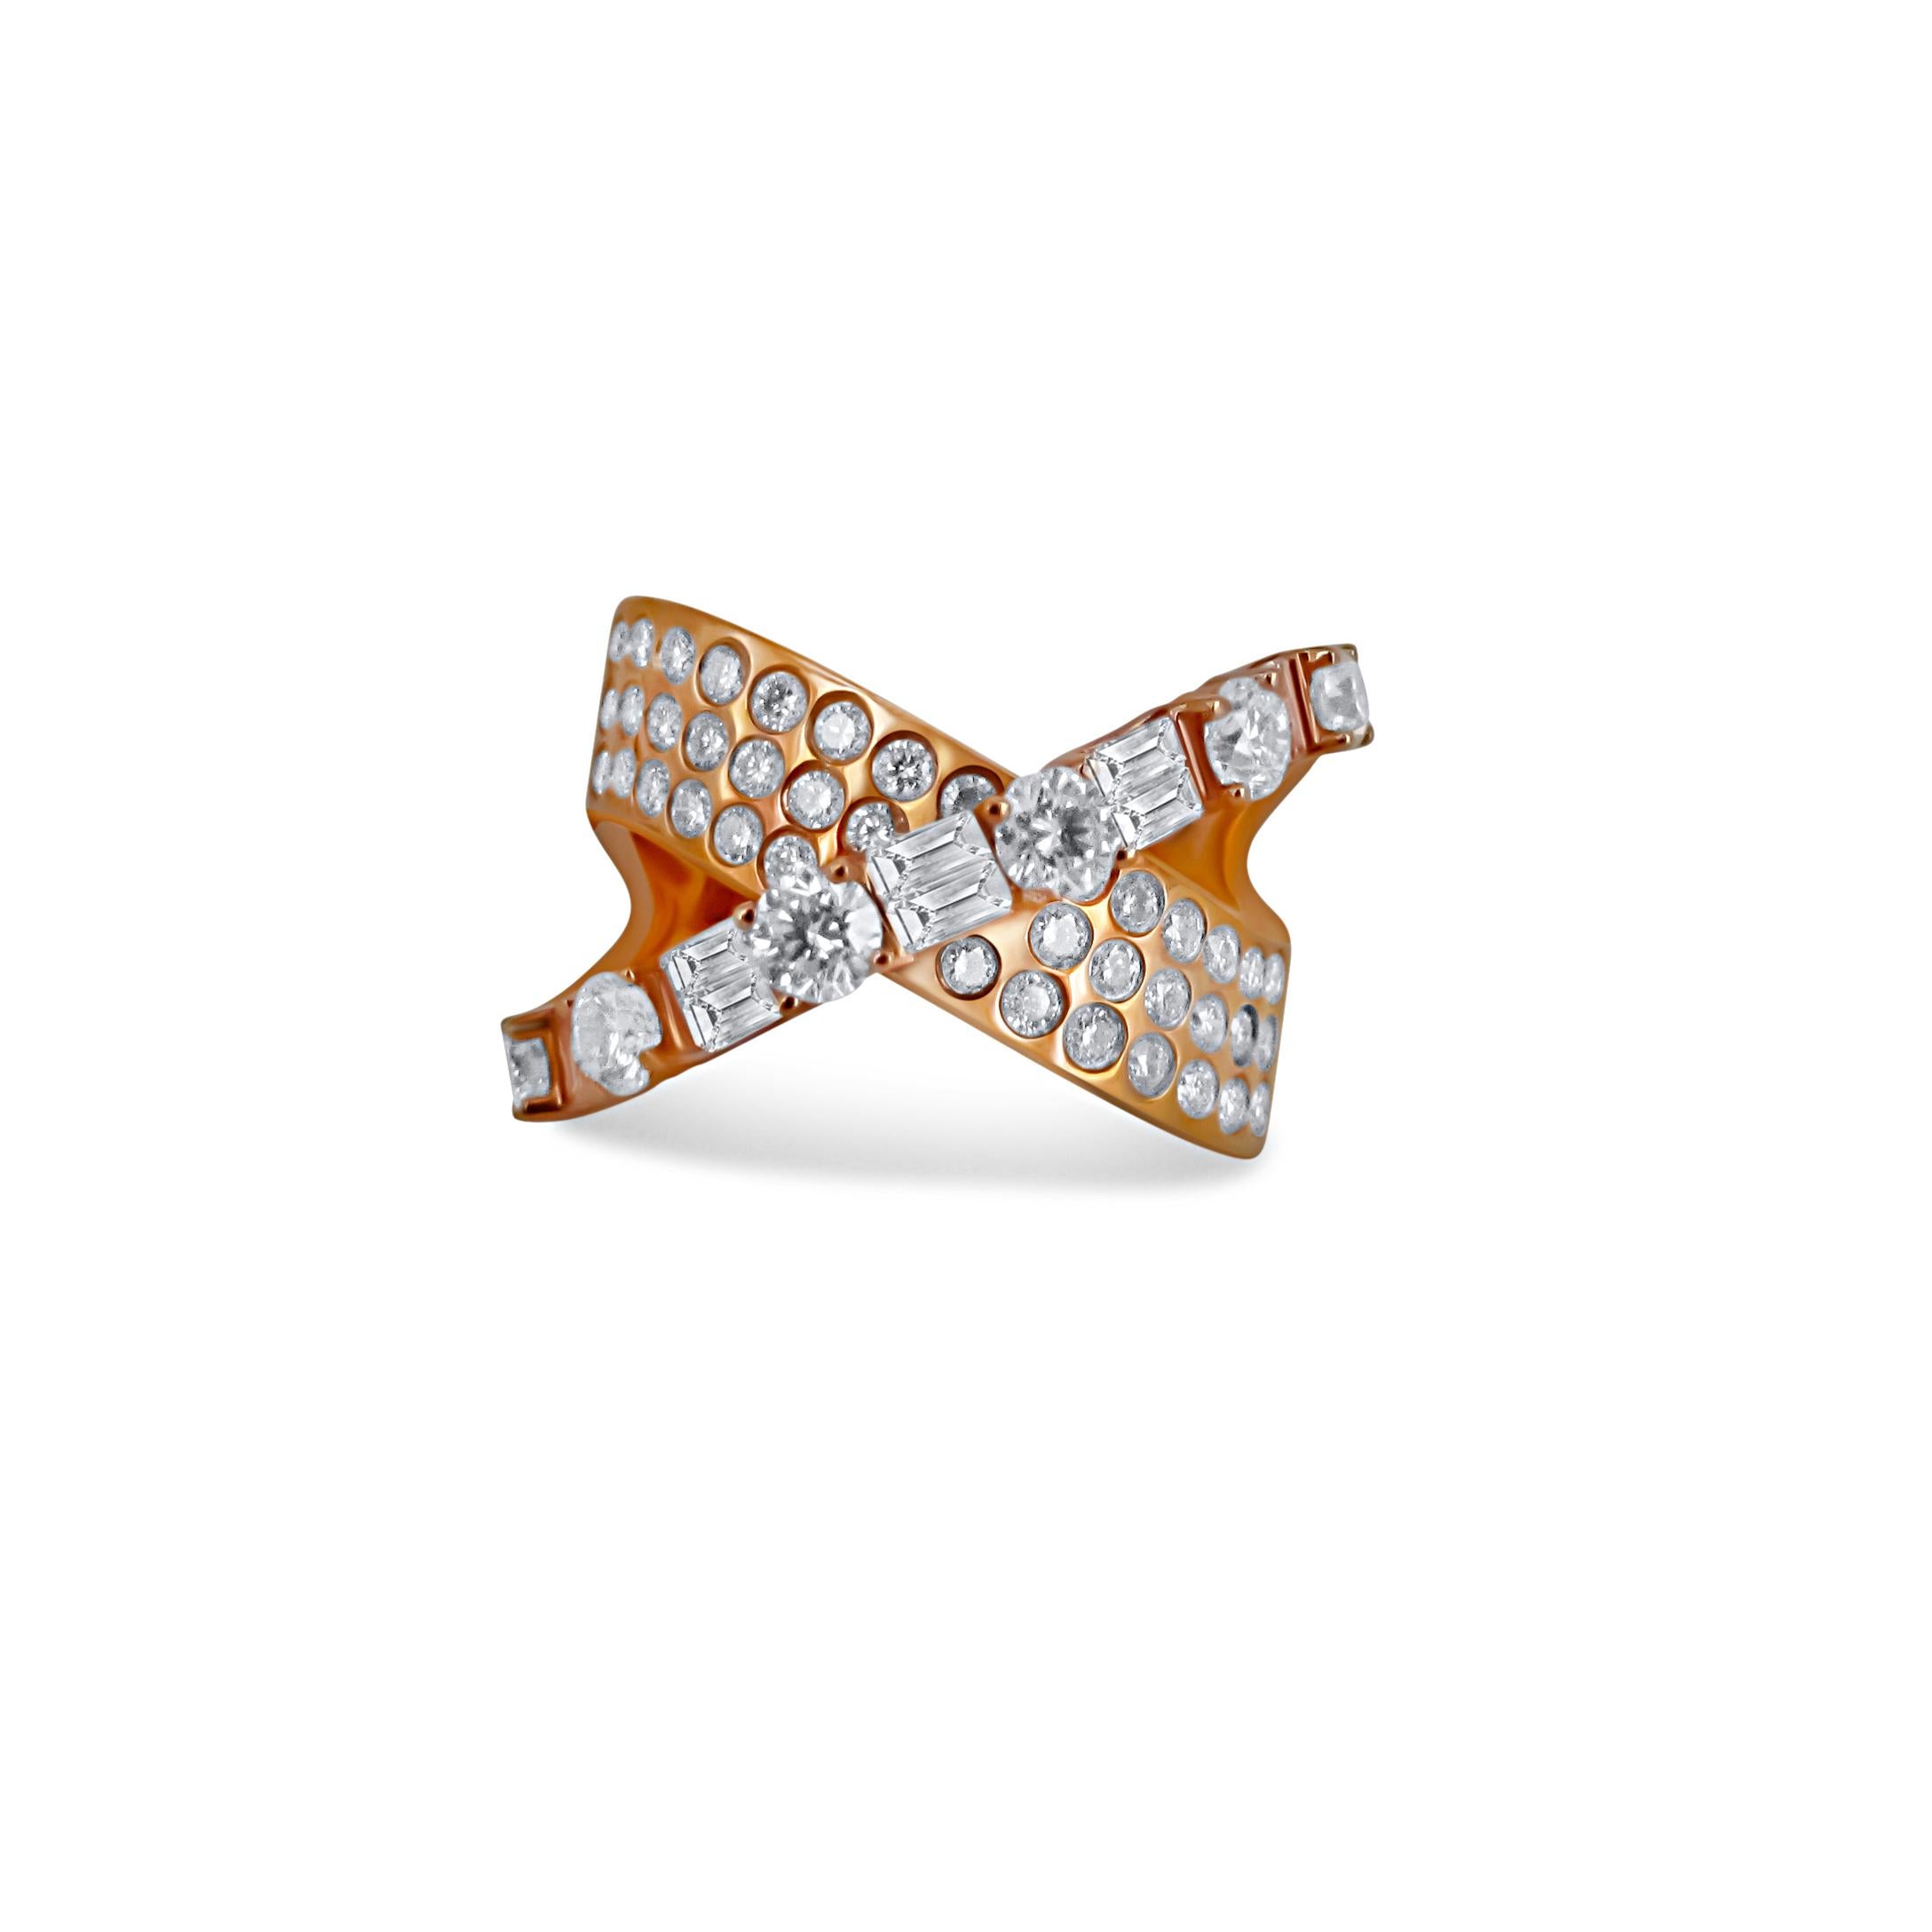 Artisan Mixed Shaped Diamonds in Criss Cross Wave Bands - Rose Gold Cocktail Ring For Sale